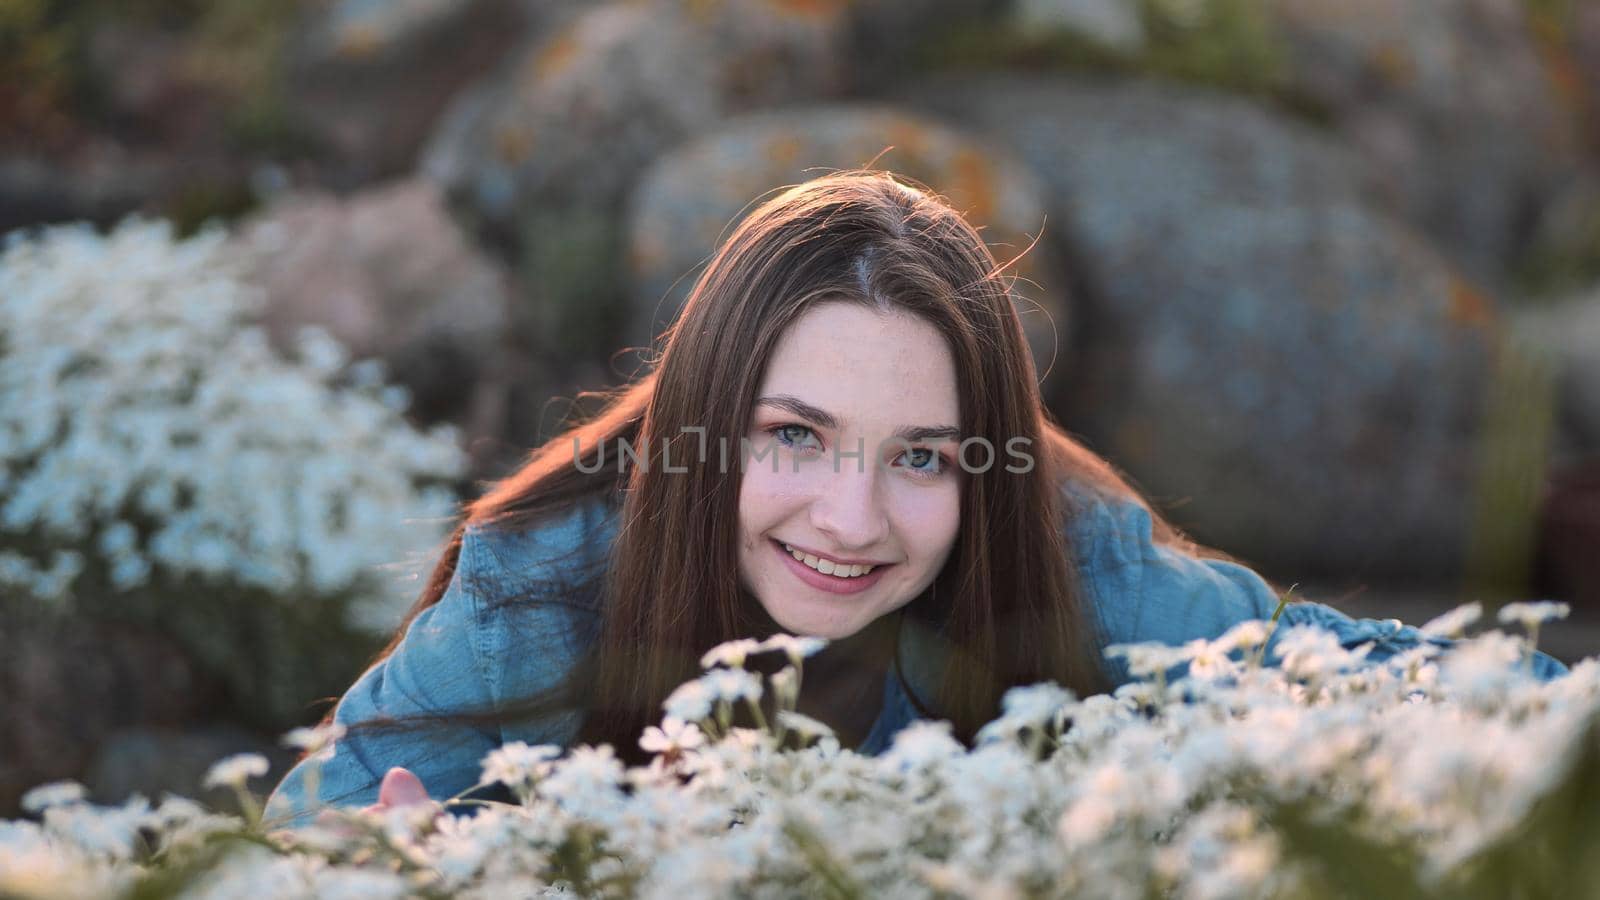 Long-haired girl sniffs white flowers and smiles. by DovidPro